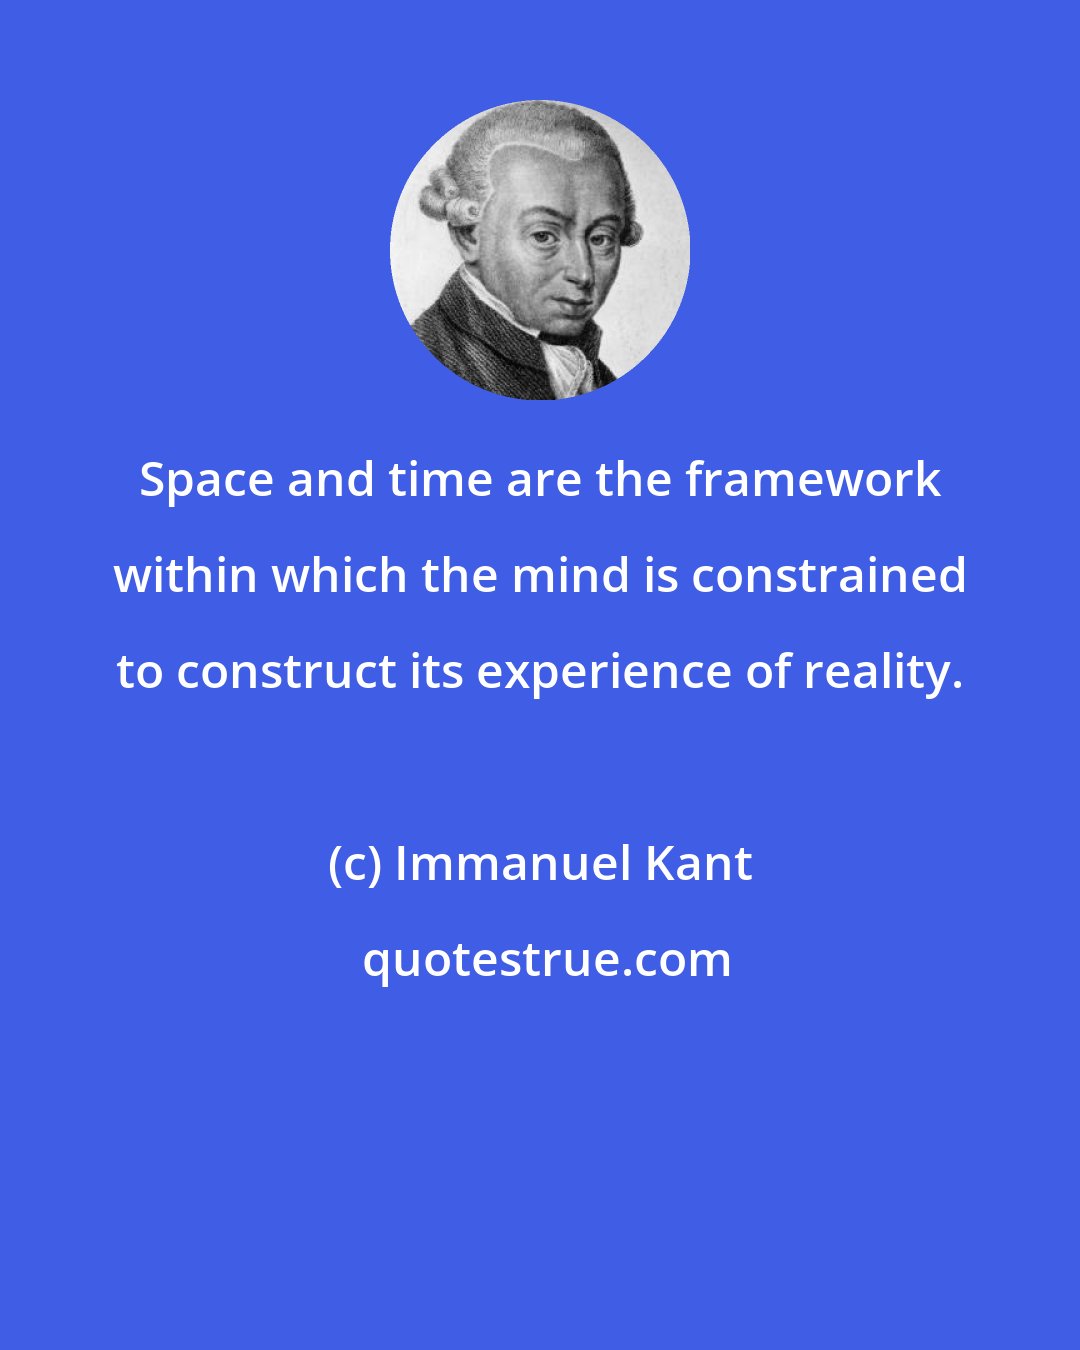 Immanuel Kant: Space and time are the framework within which the mind is constrained to construct its experience of reality.